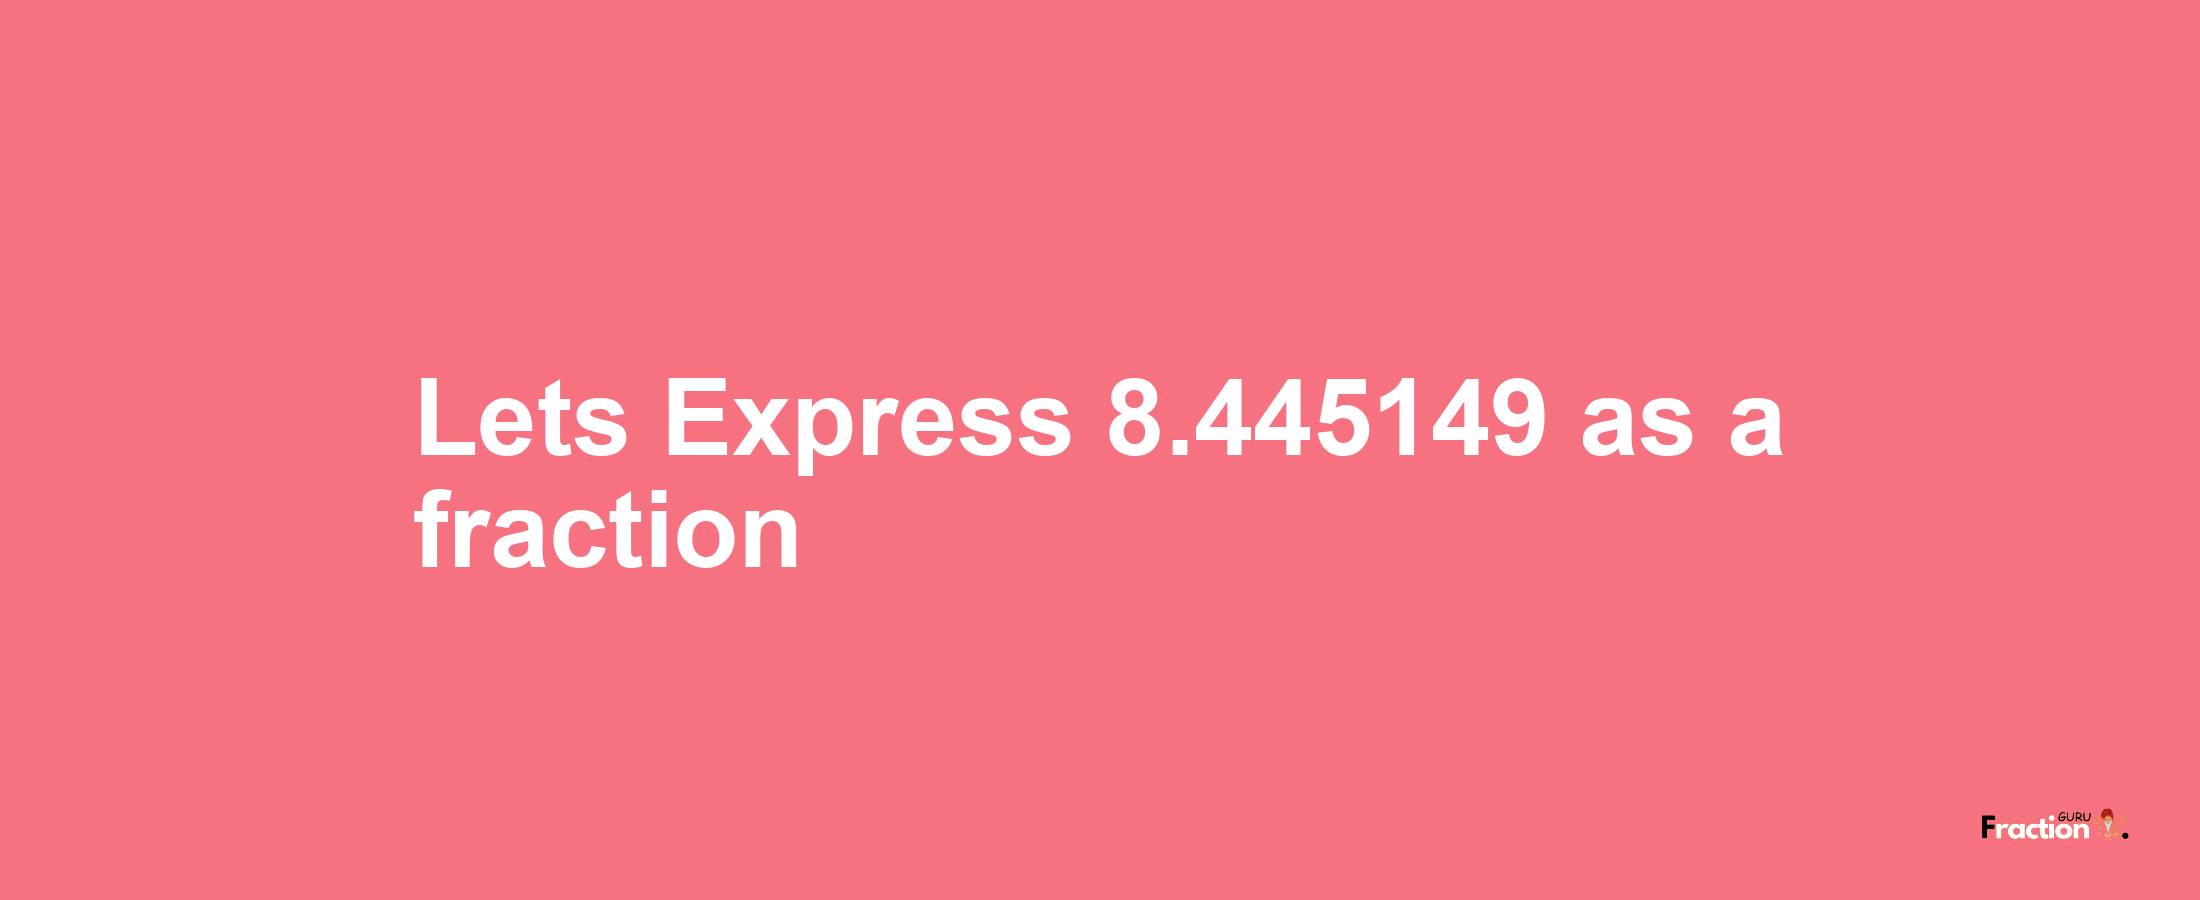 Lets Express 8.445149 as afraction